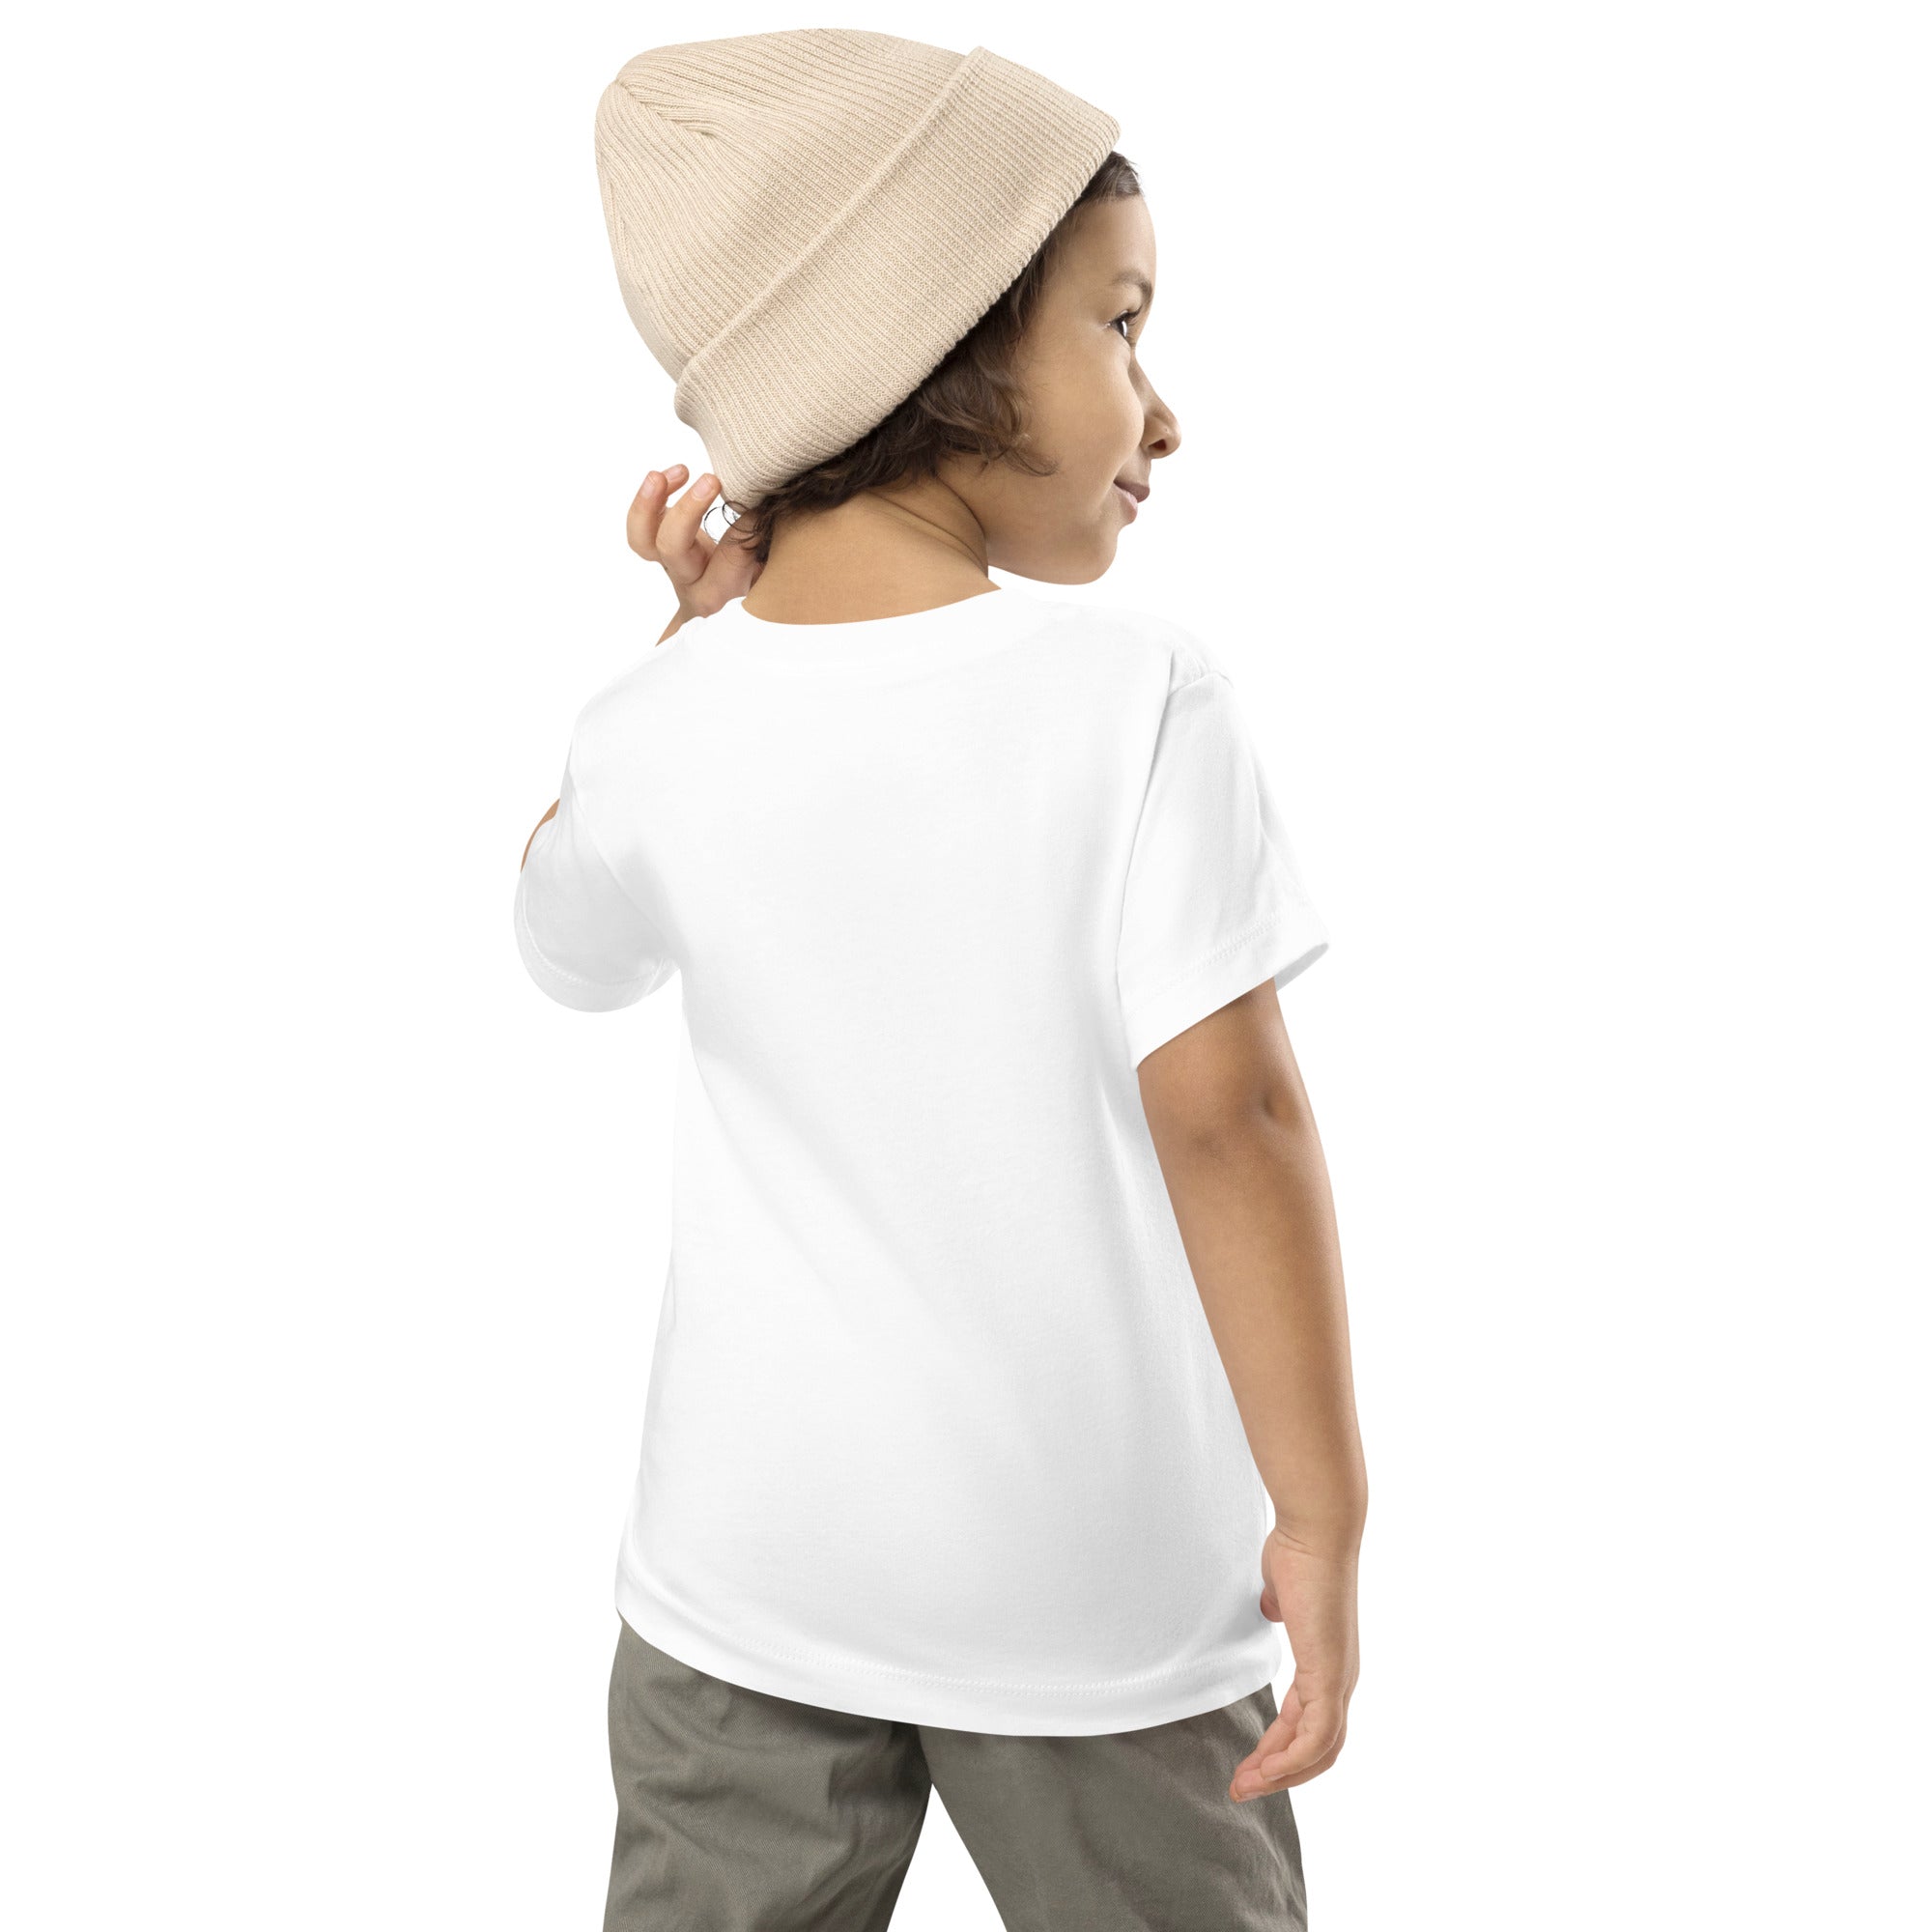 Future Boarder Toddler T-Shirt